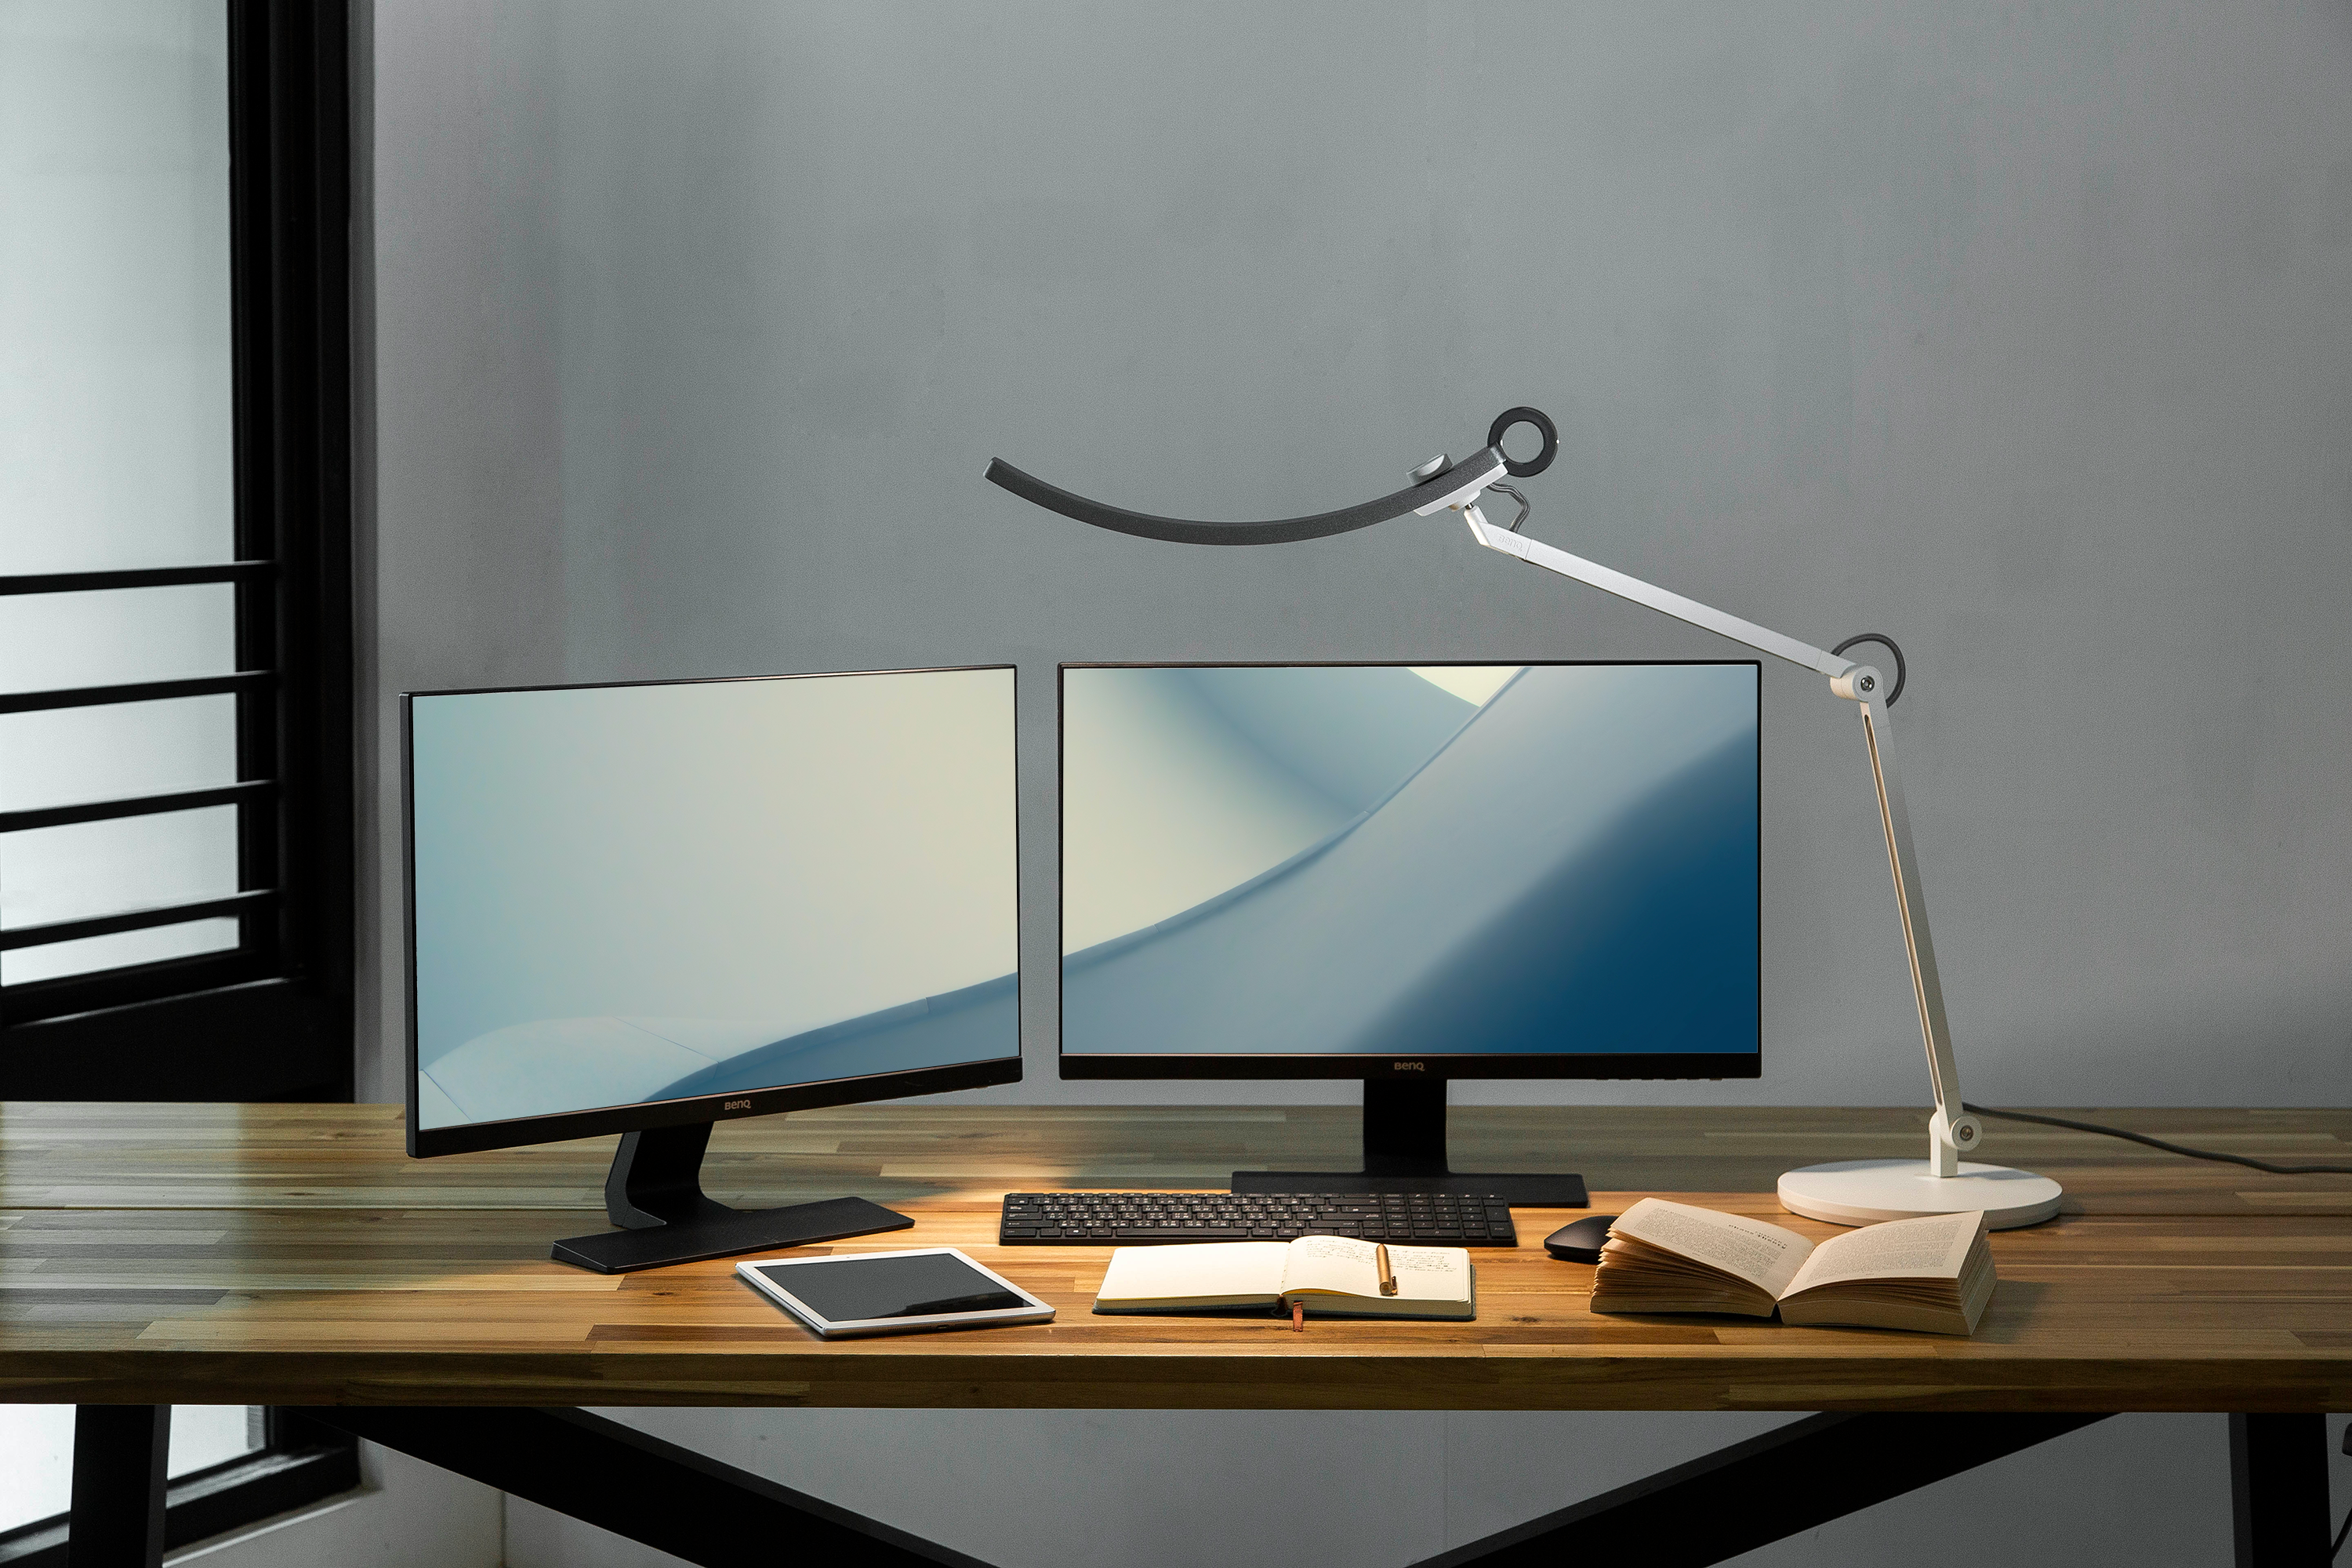 People who struggle to see their workstations due to poor <strong>illumination in small spaces like an office desk can use desk lamps to illuminate specific room areas.